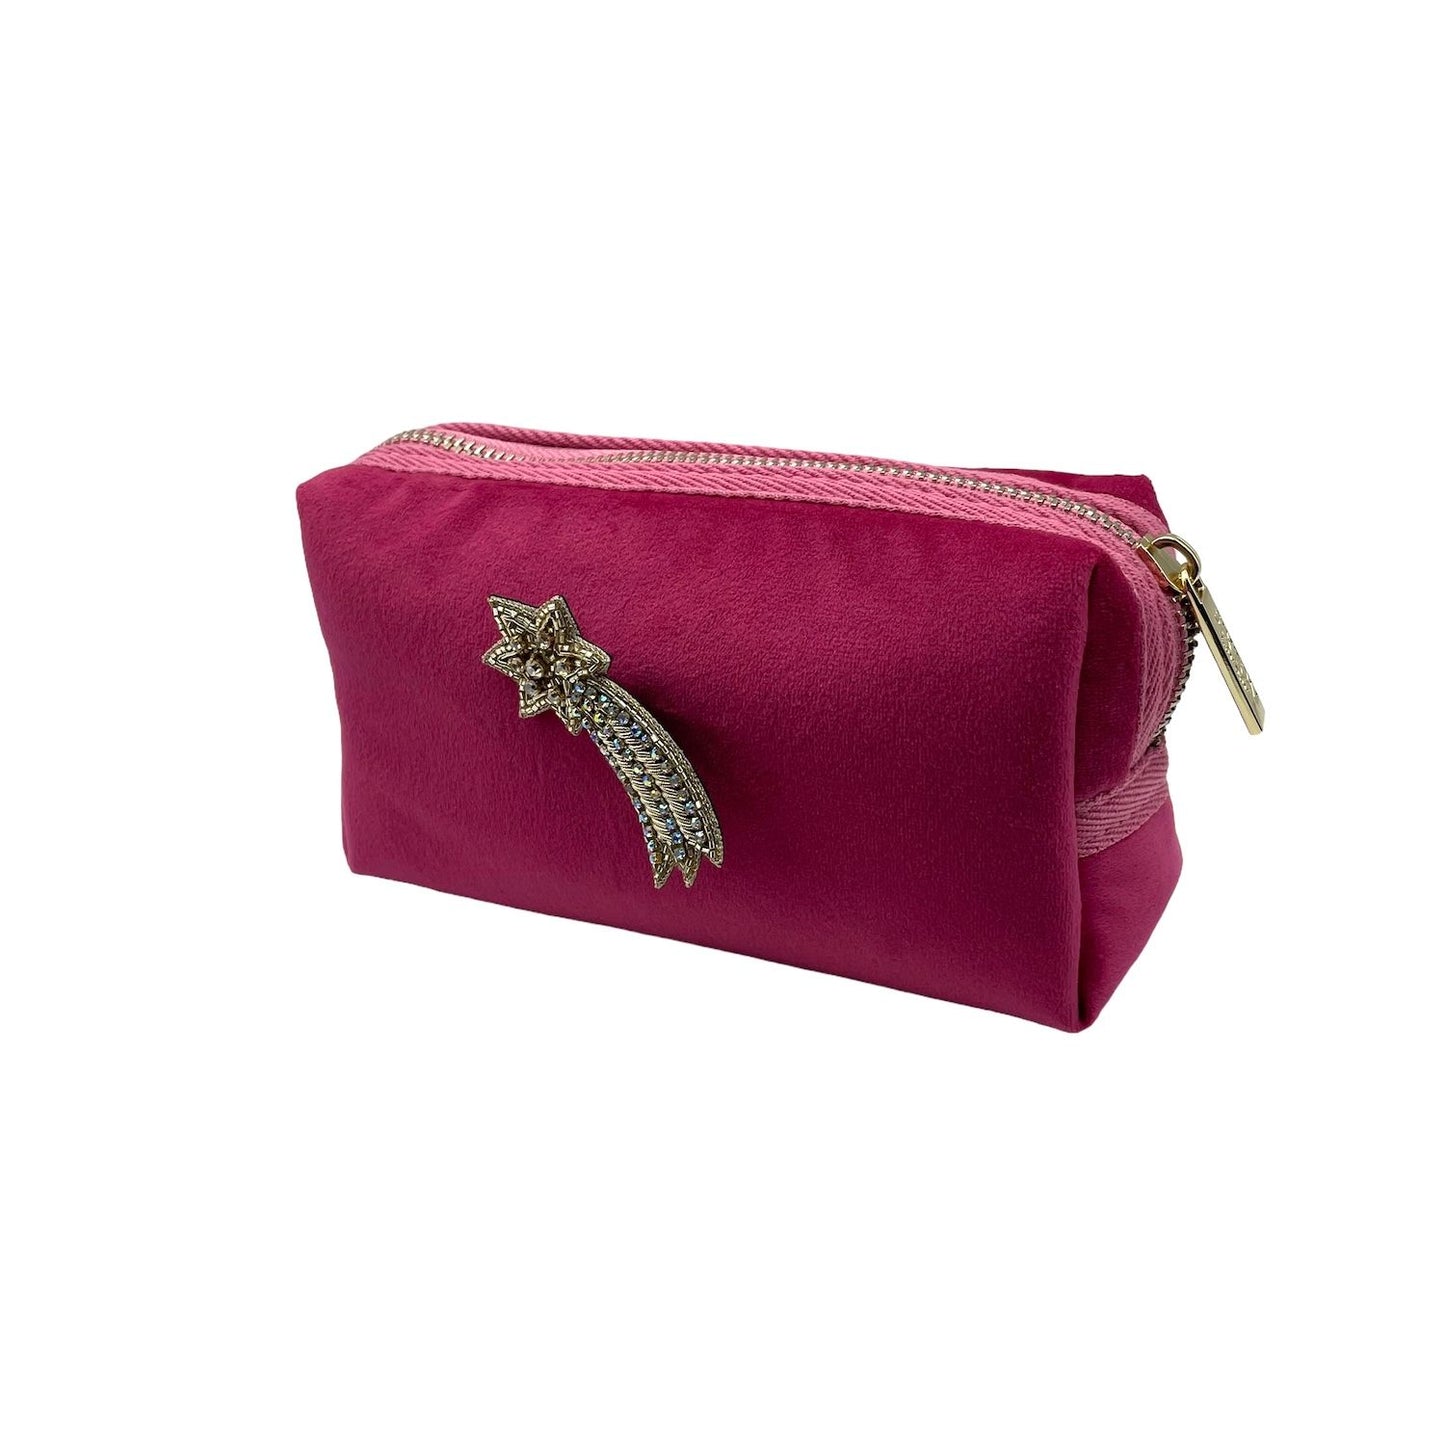 Bright pink make-up bag and a shooting star pin - recycled velvet